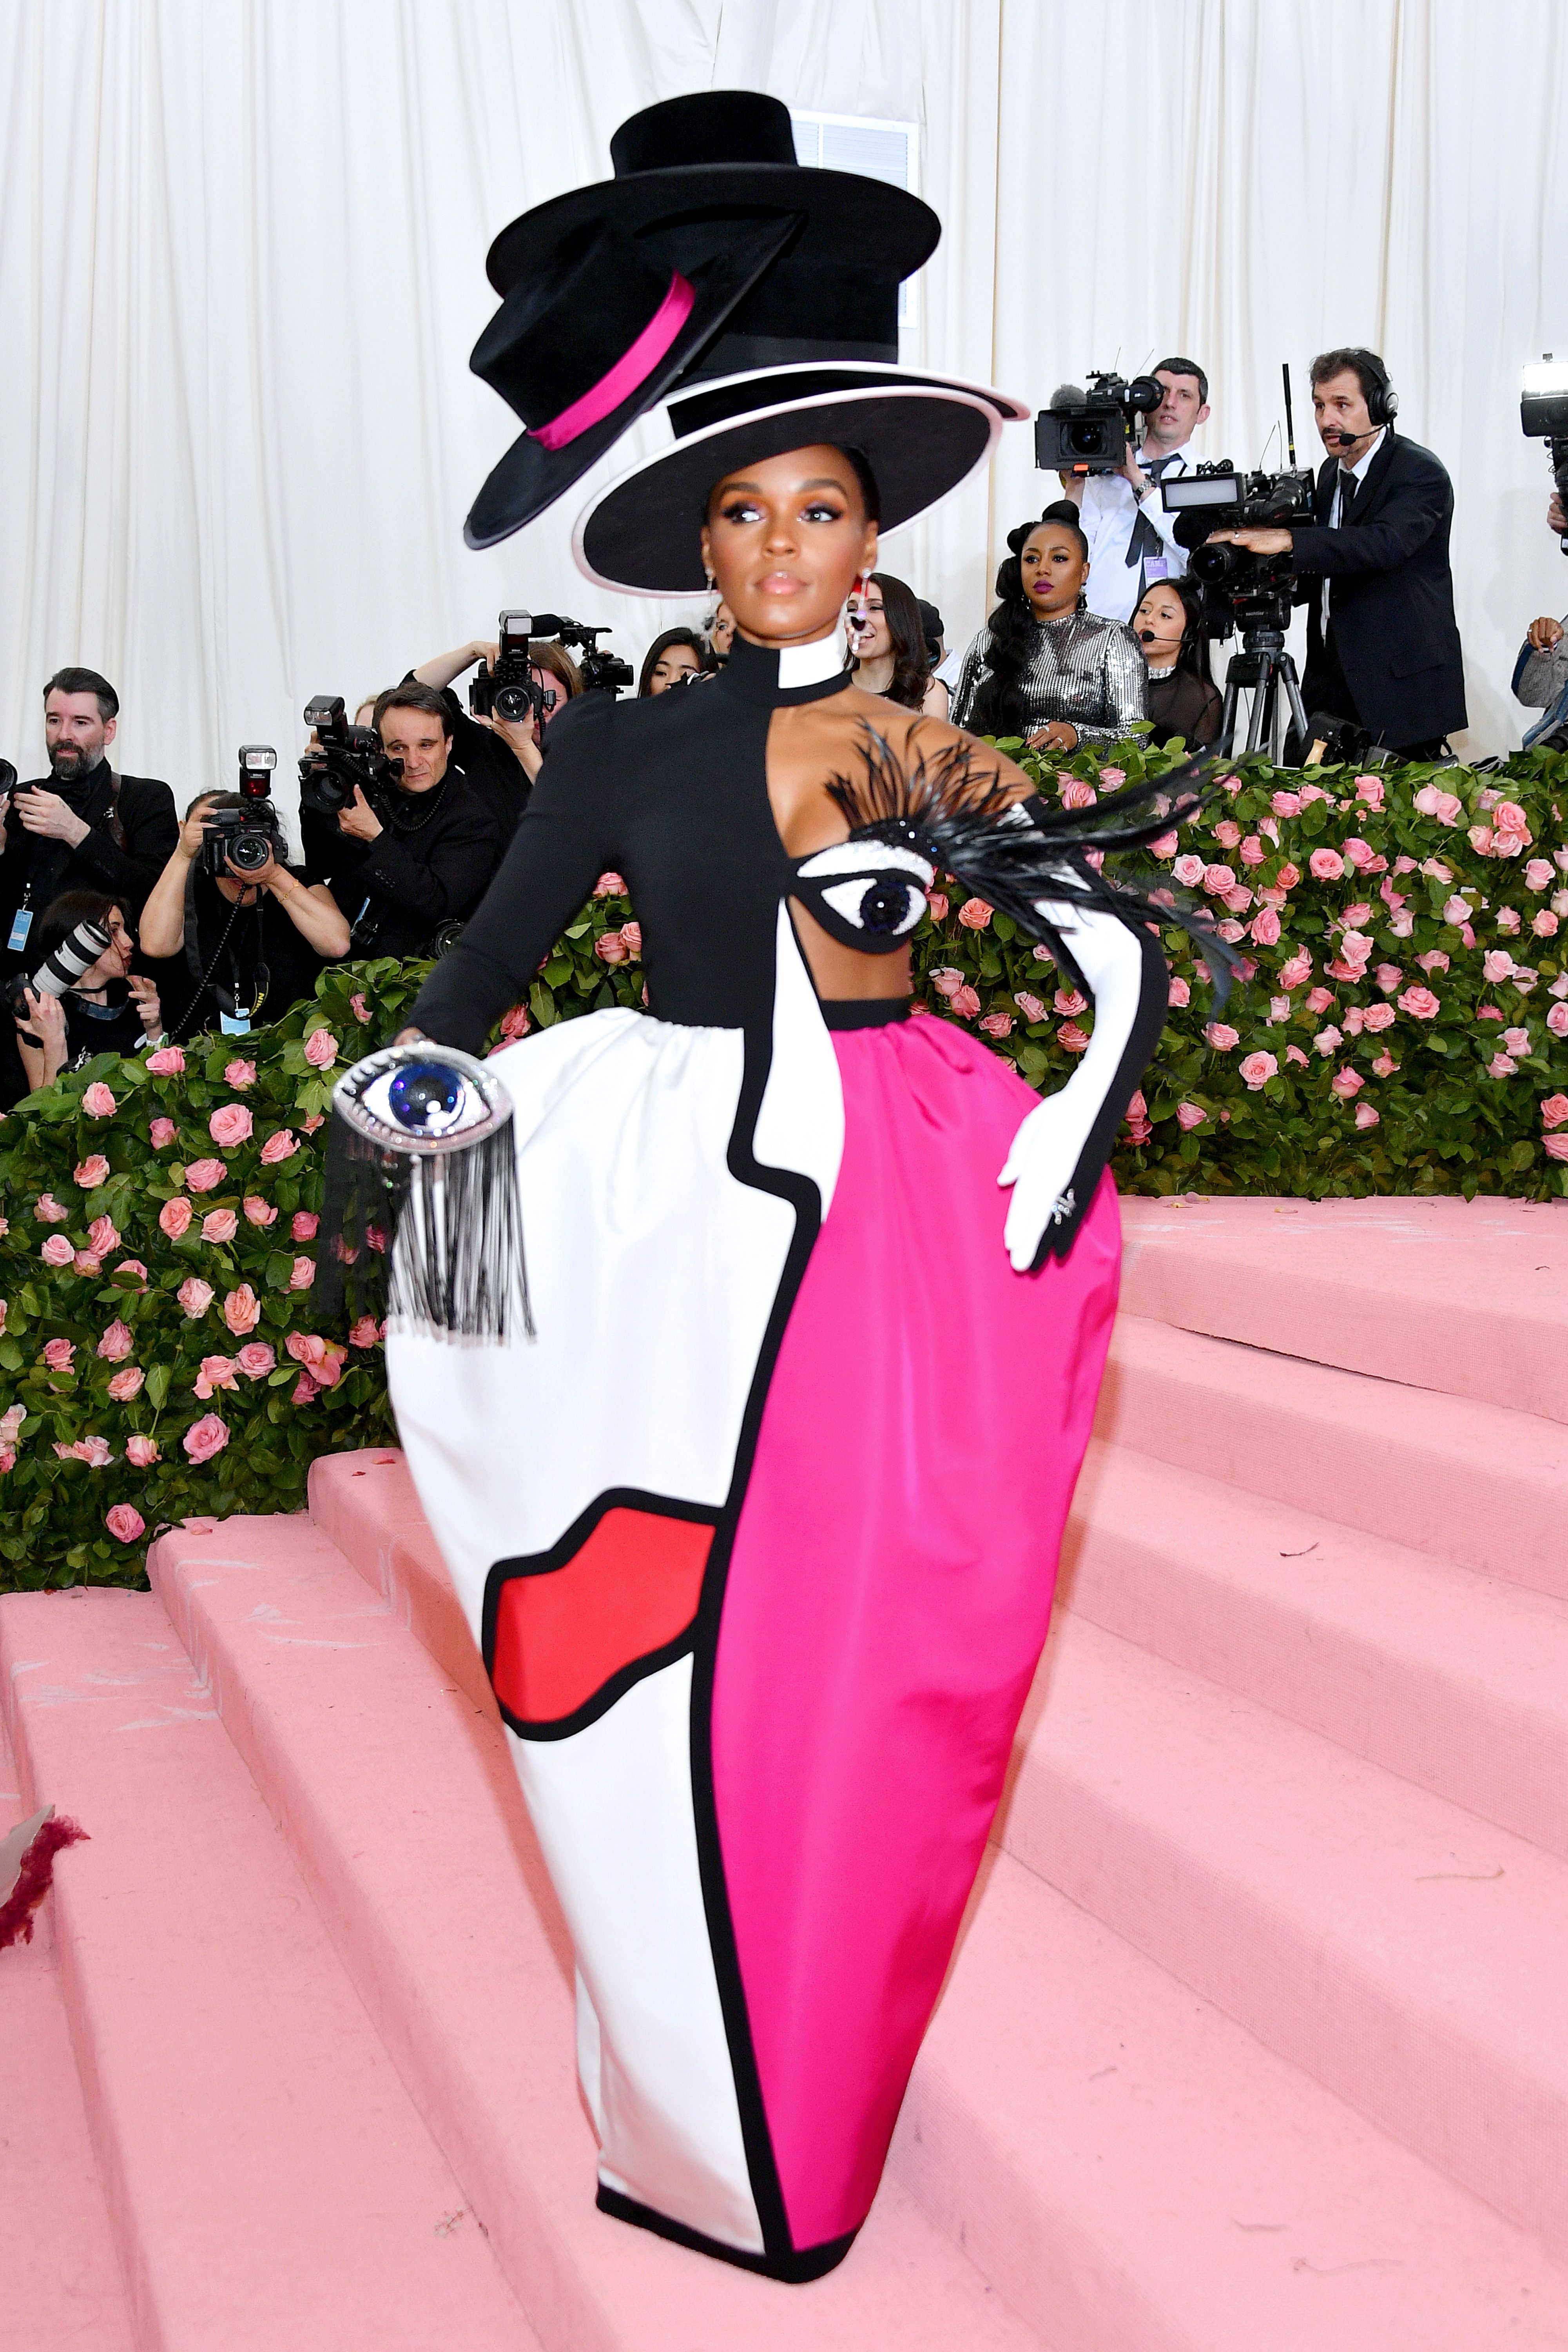 Met Gala 2019 Red Carpet: See All the Celebrity Dresses, Outfits, and Looks  Here